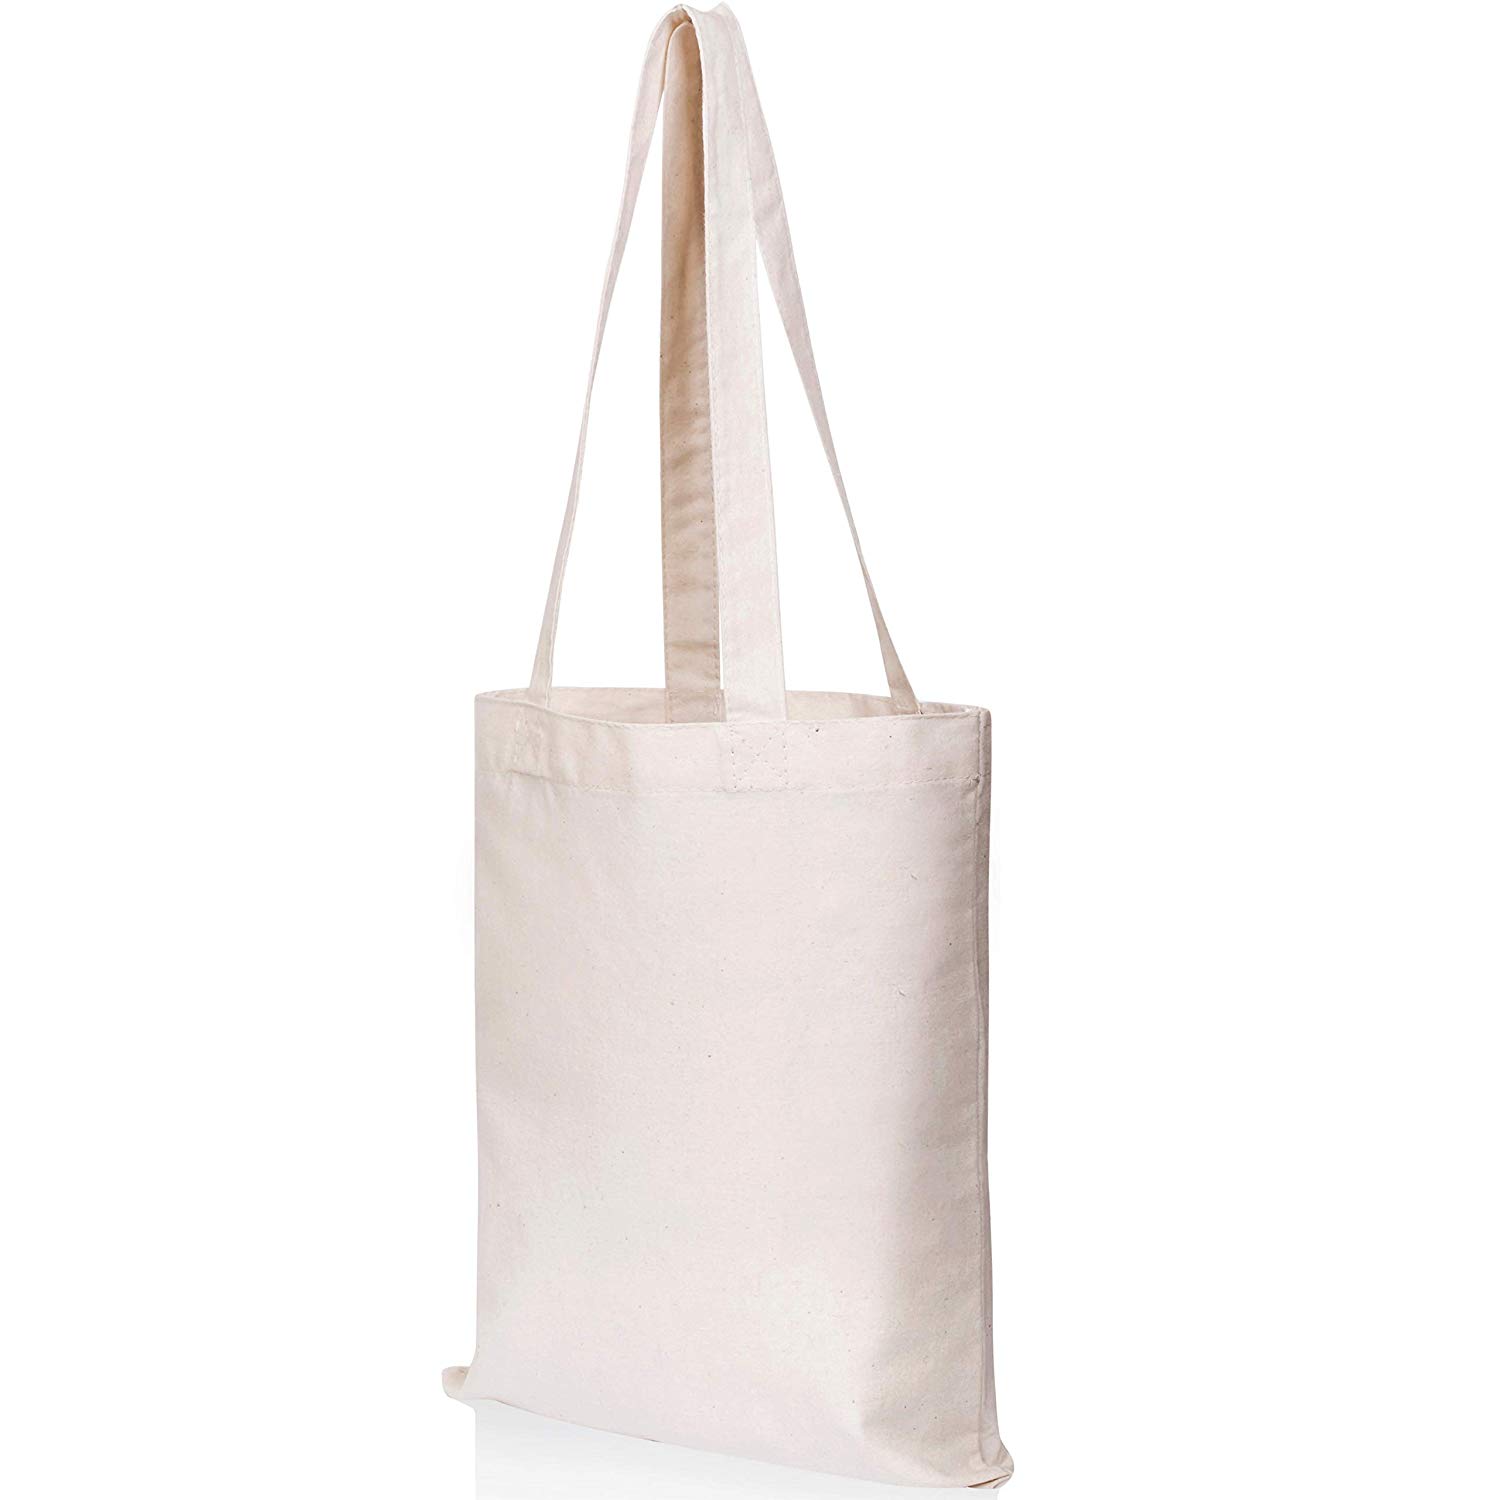 Canvas Bags - Buy Canvas Bags Online From manufacturer, Exporter and ...